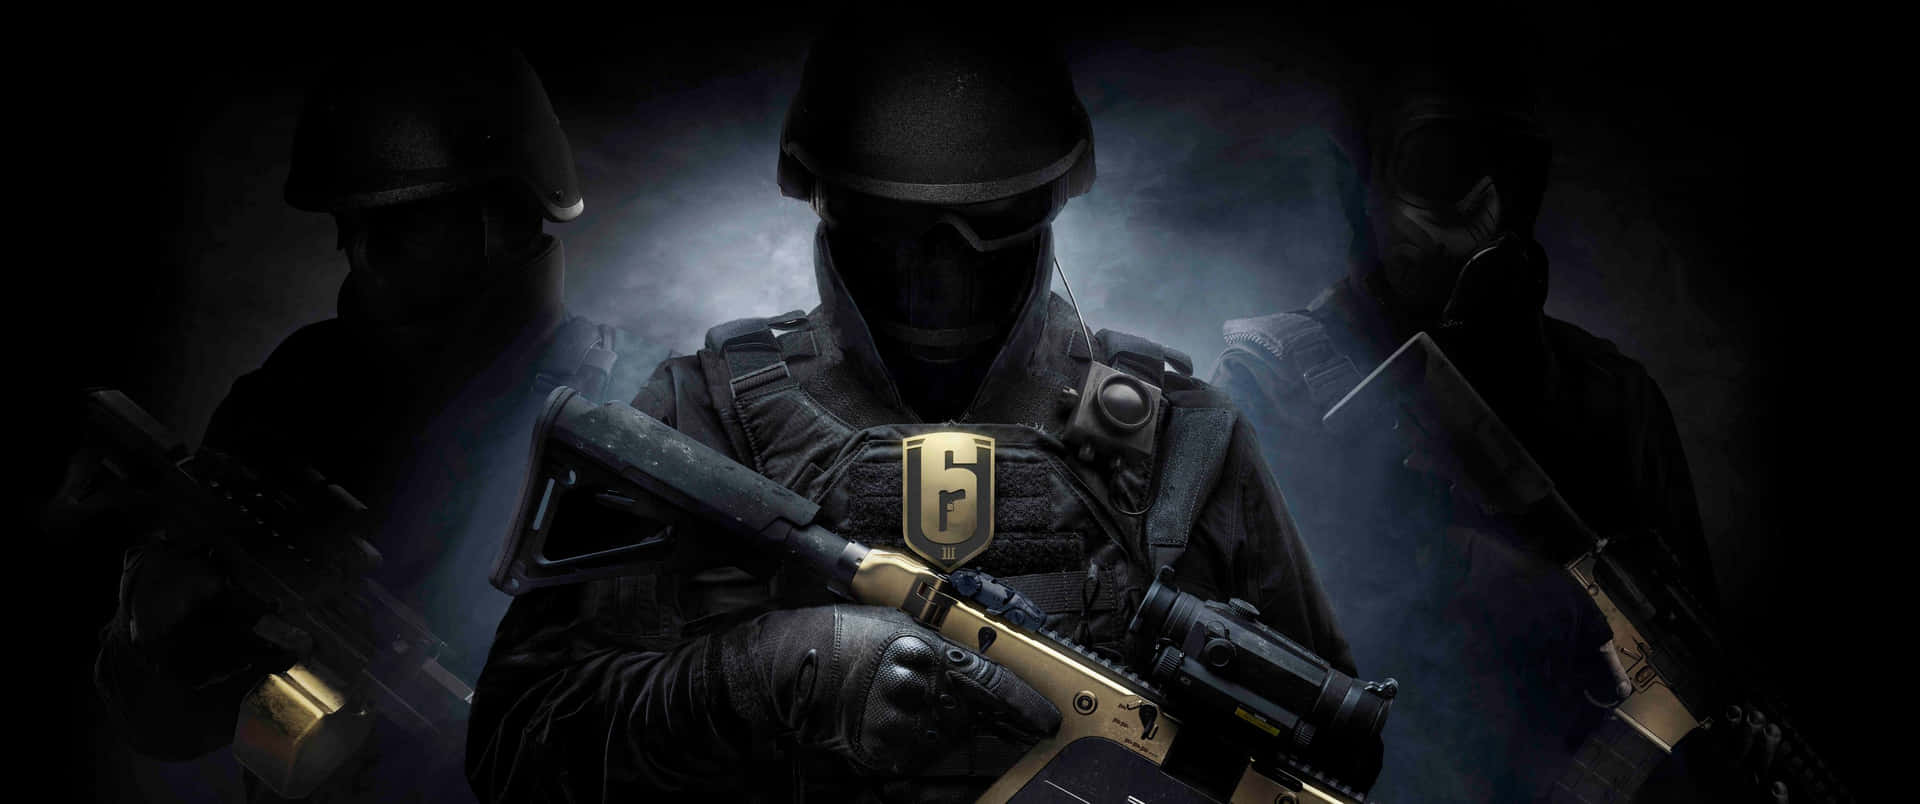 Fire up the intensity with 'Rainbow Six Siege'